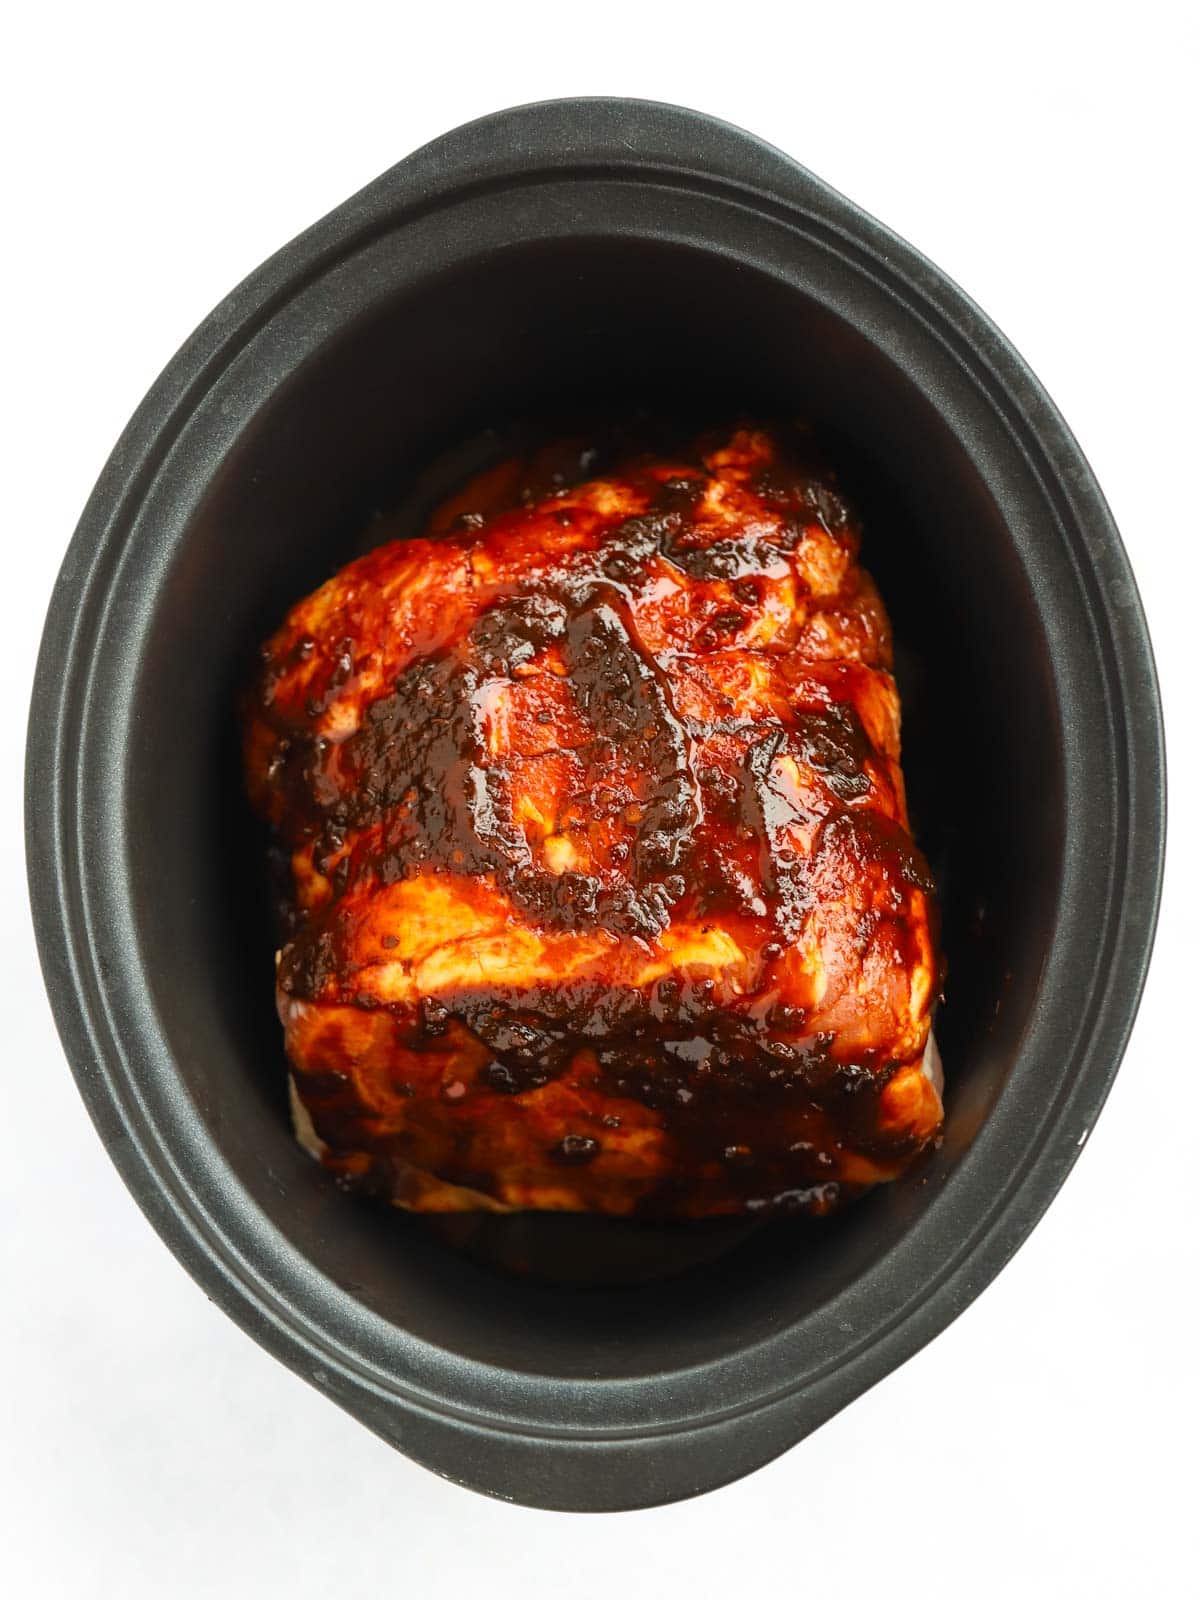 pork shoulder joint smothered in chipotle, ketchup and honey marinade sat in a black slow cooker